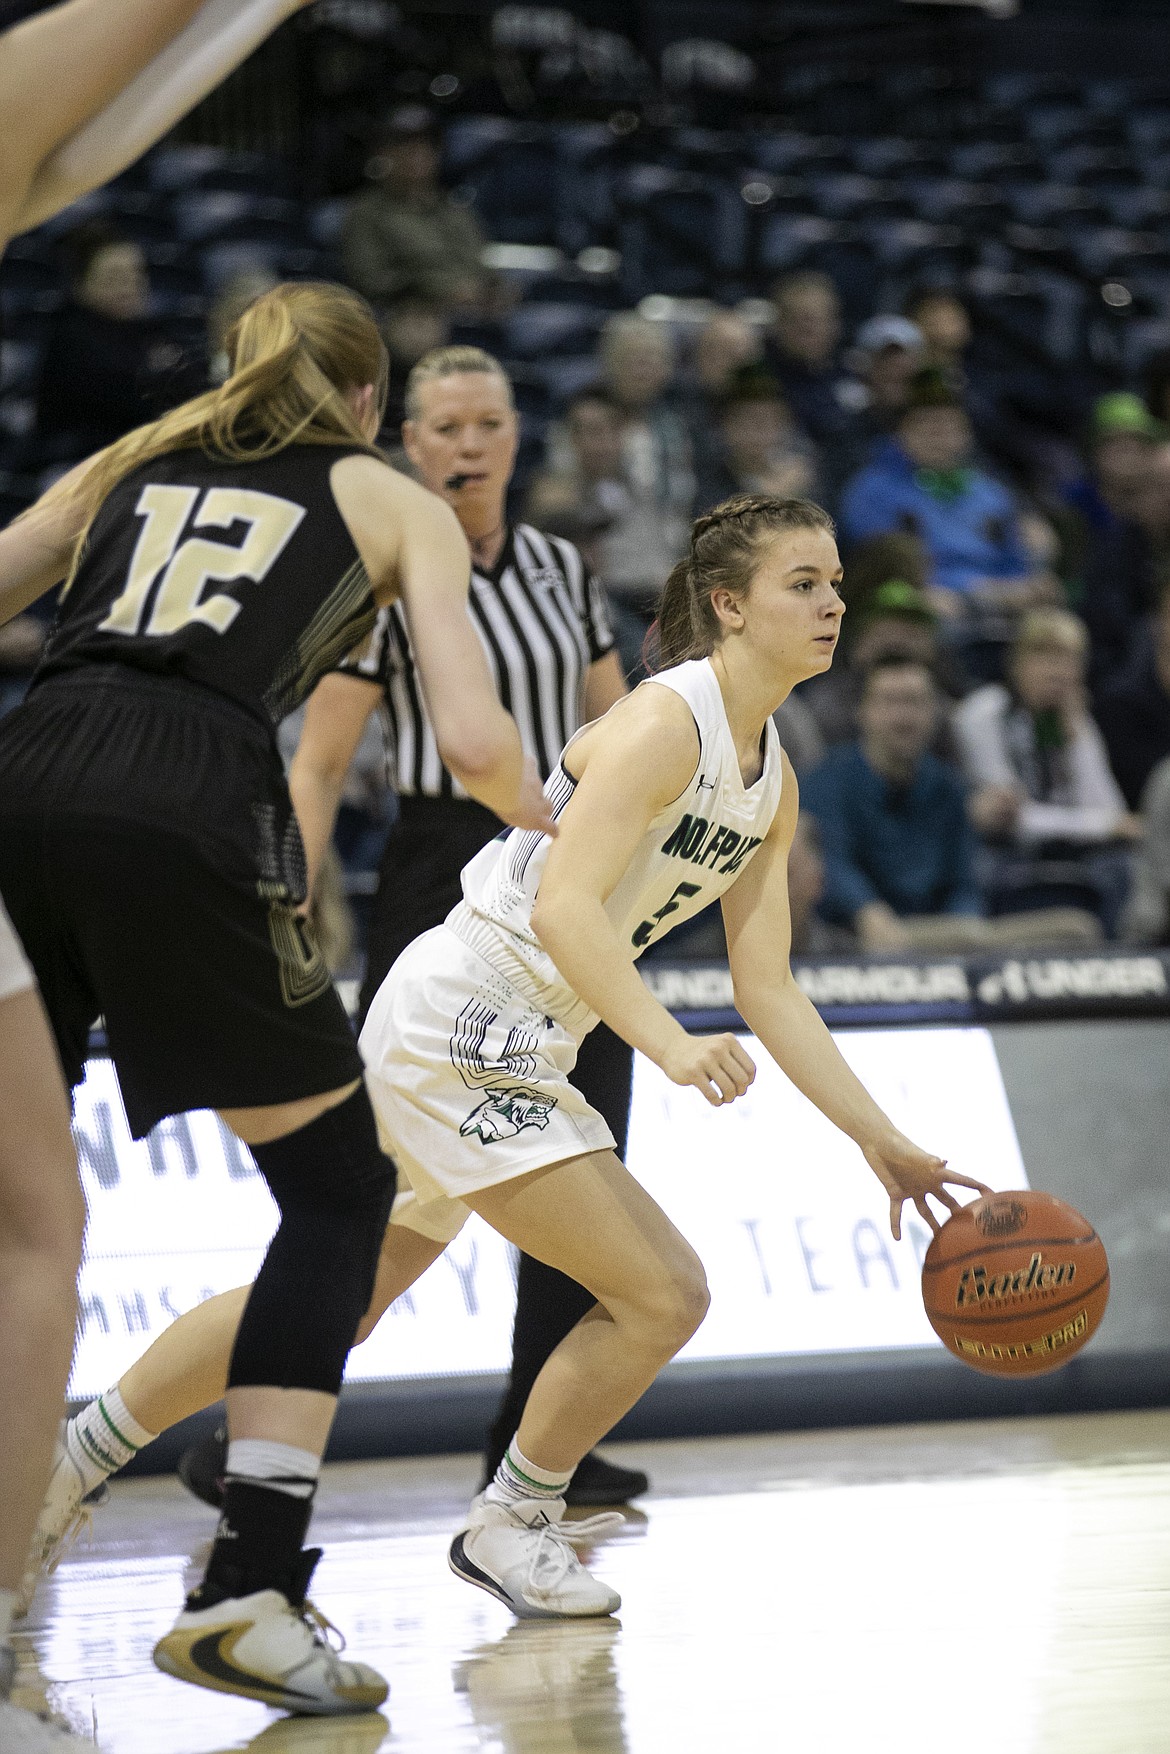 Glacier’s Aubry Grame takes the ball to the top of the key against Billings West in a quarterfinal game of the Class AA State Tournament Thursday, March 12, 2020, at Worthington Arena in Bozeman.  (Ryan Berry/Bozeman Daily Chronicle)